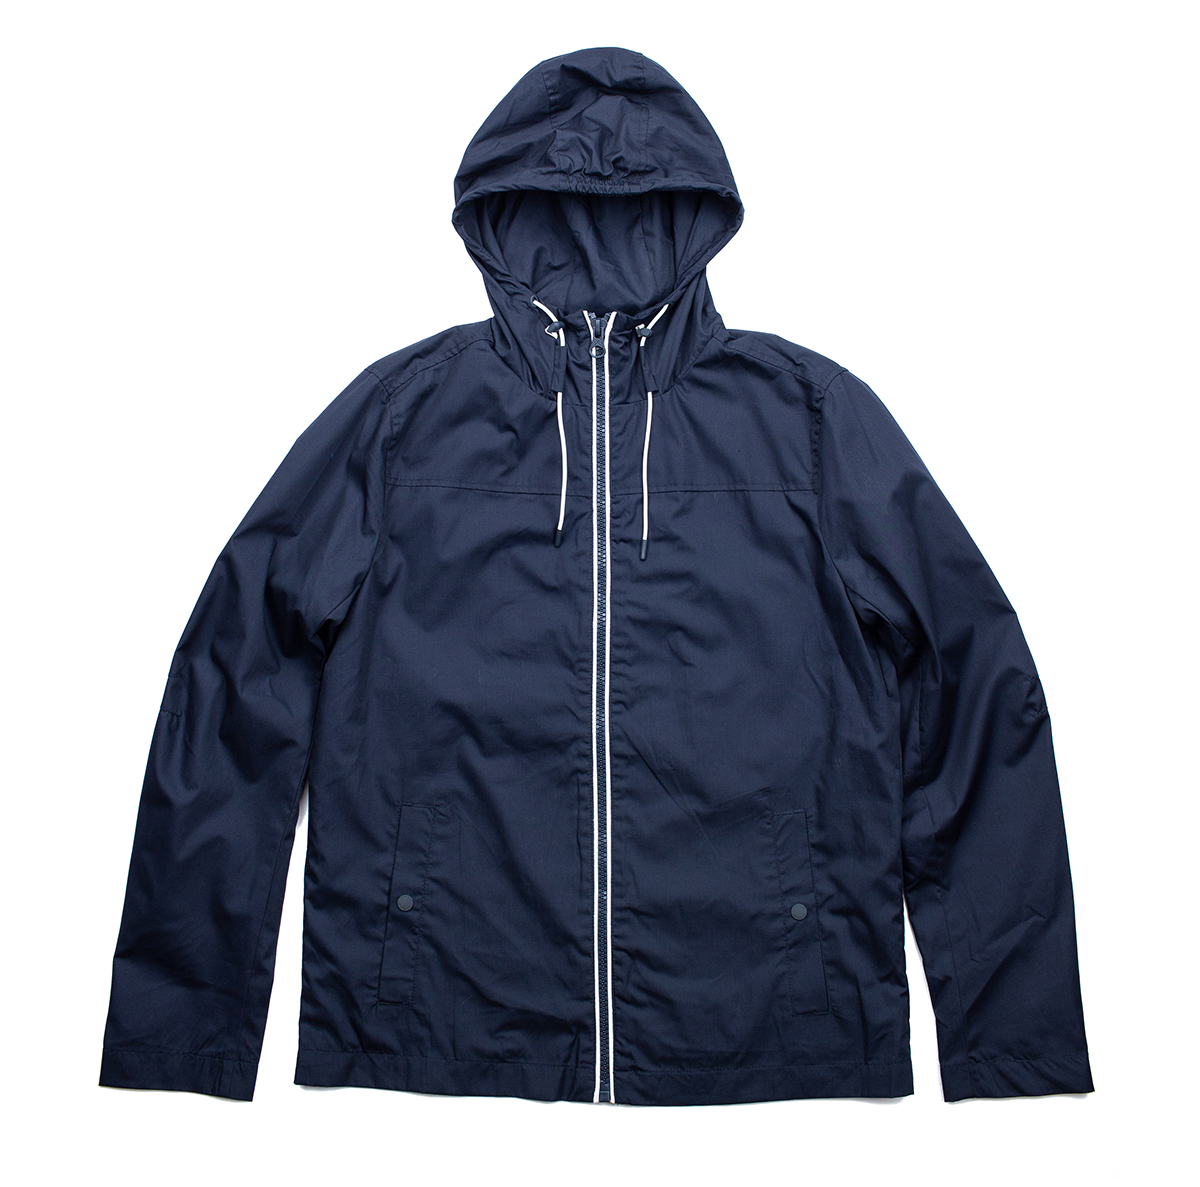 Jackets Manufacturers | China, Vietnam and Myanmar | For Top Brands